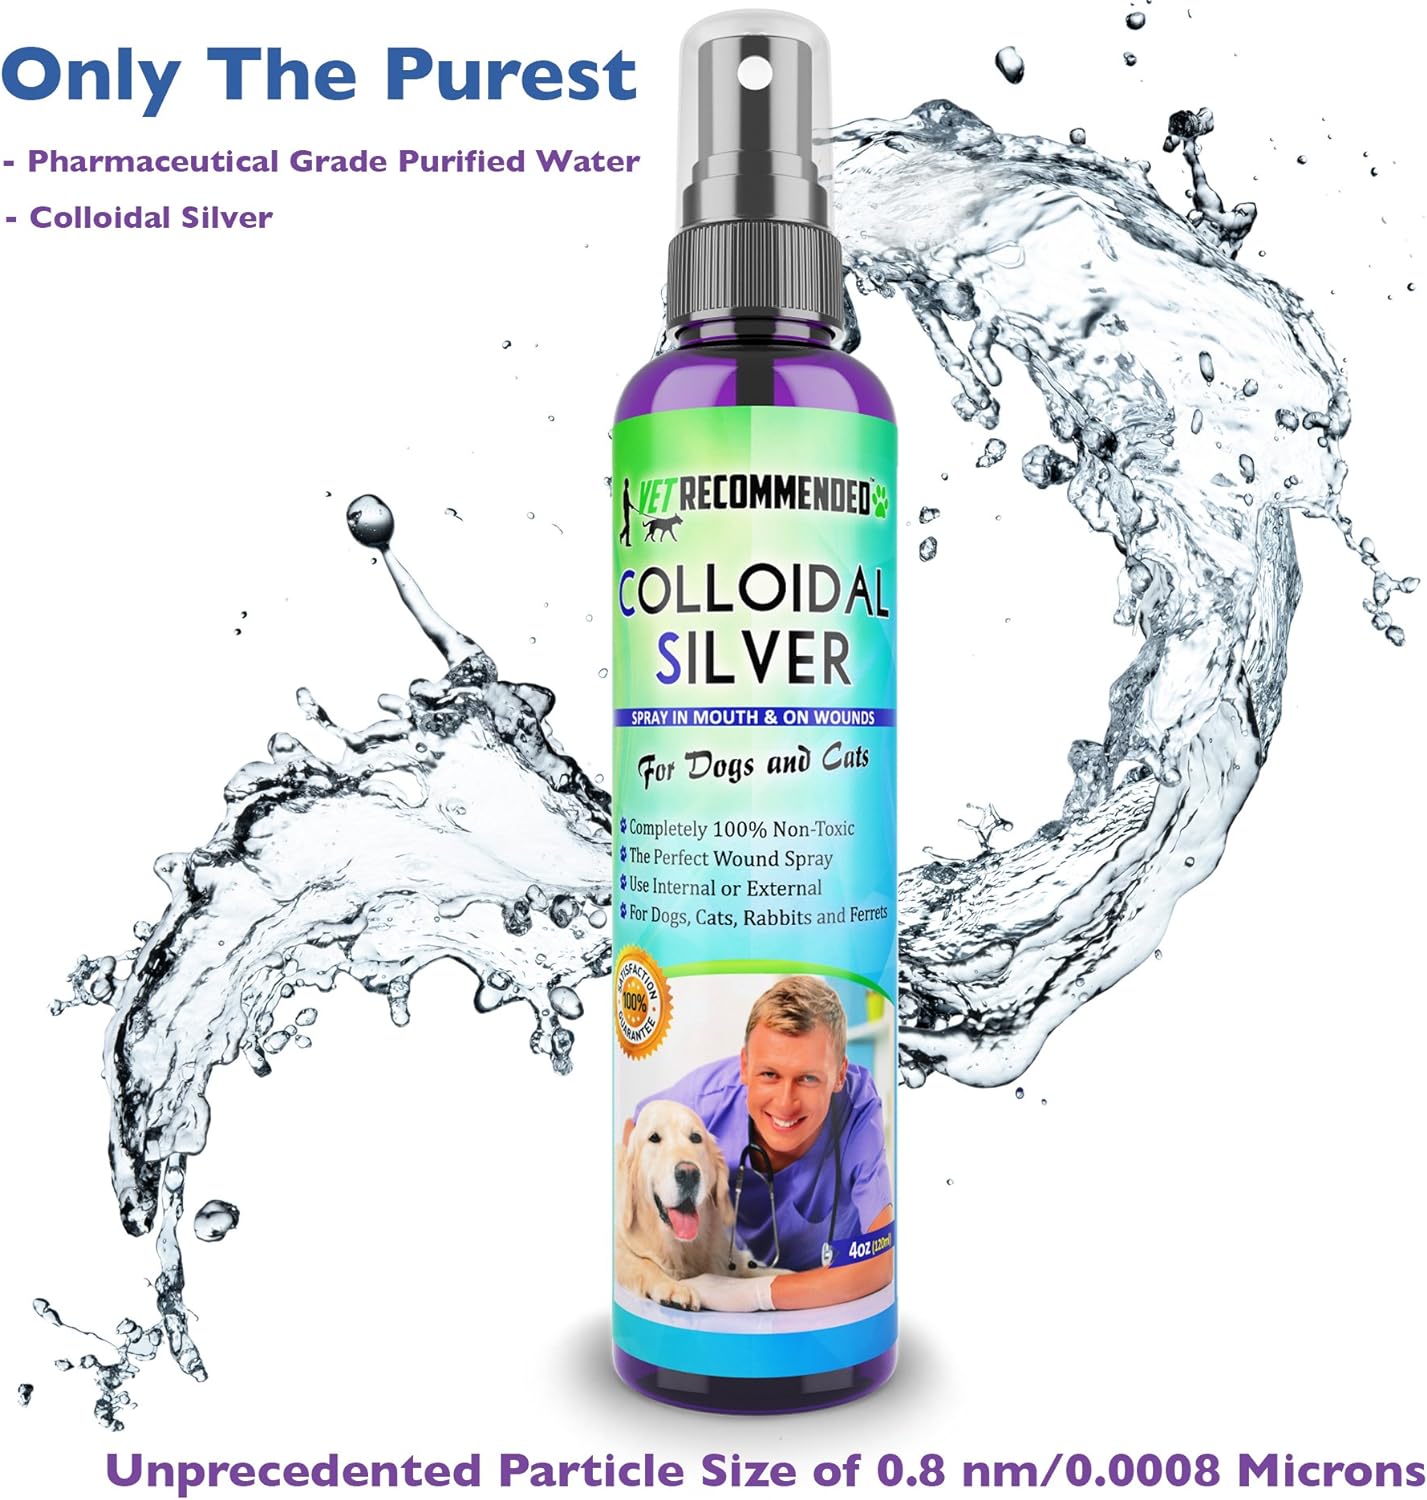 Vet Recommended - Colloidal Silver for Dogs & Cats - (4oz/120ml) - Colloidal Silver Spray That Works as Natural Hot Spot Solution - Made in USA : Pet Supplies